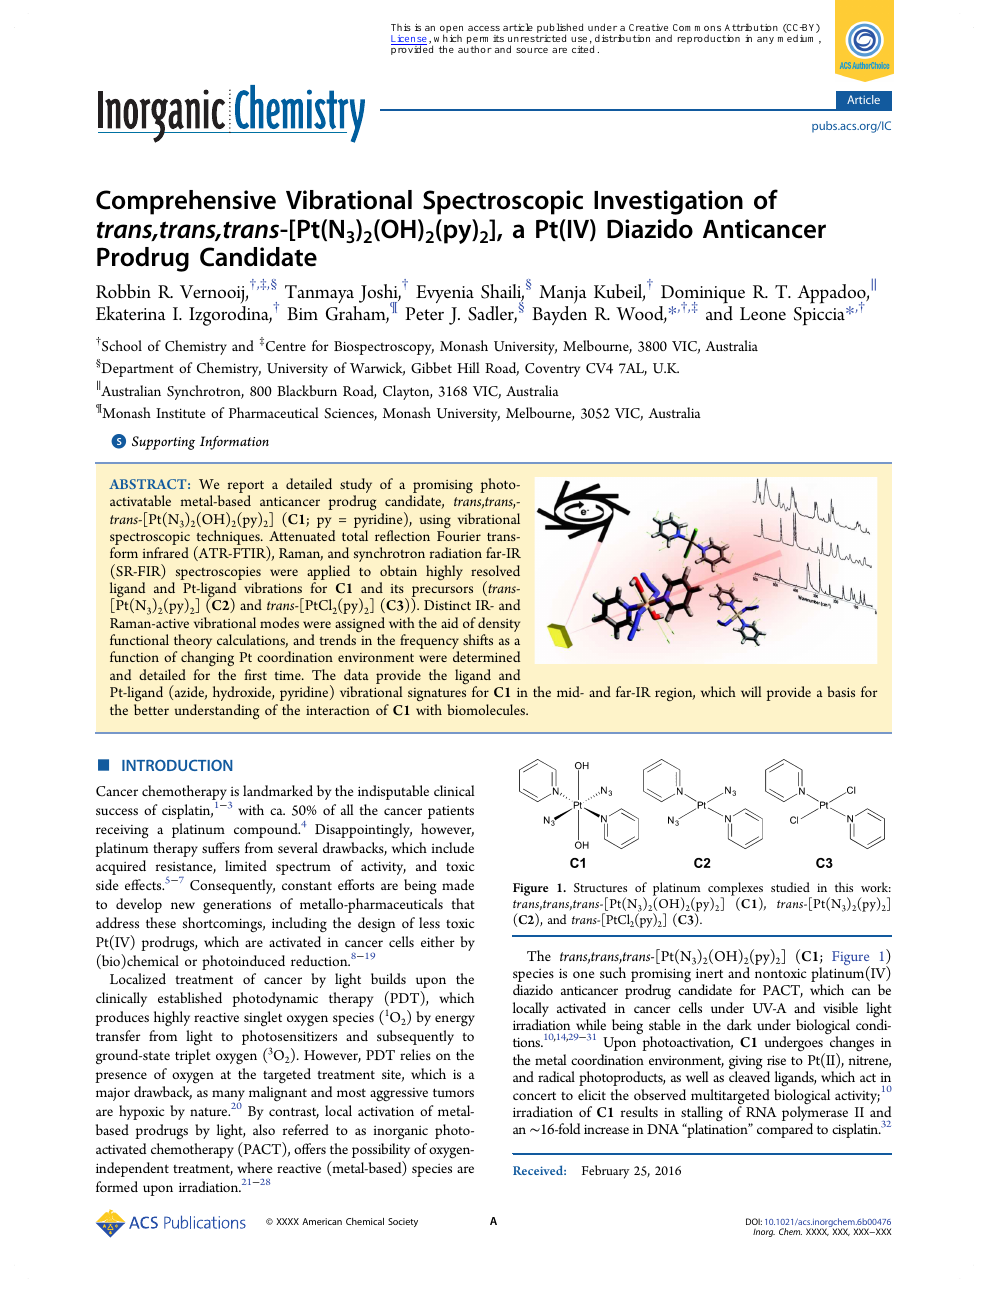 Comprehensive Vibrational Spectroscopic Investigation Oftrans Trans Trans Pt N3 2 Oh 2 Py 2 A Pt Iv Diazido Anticancer Prodrug Candidate Topic Of Research Paper In Chemical Sciences Download Scholarly Article Pdf And Read For Free On